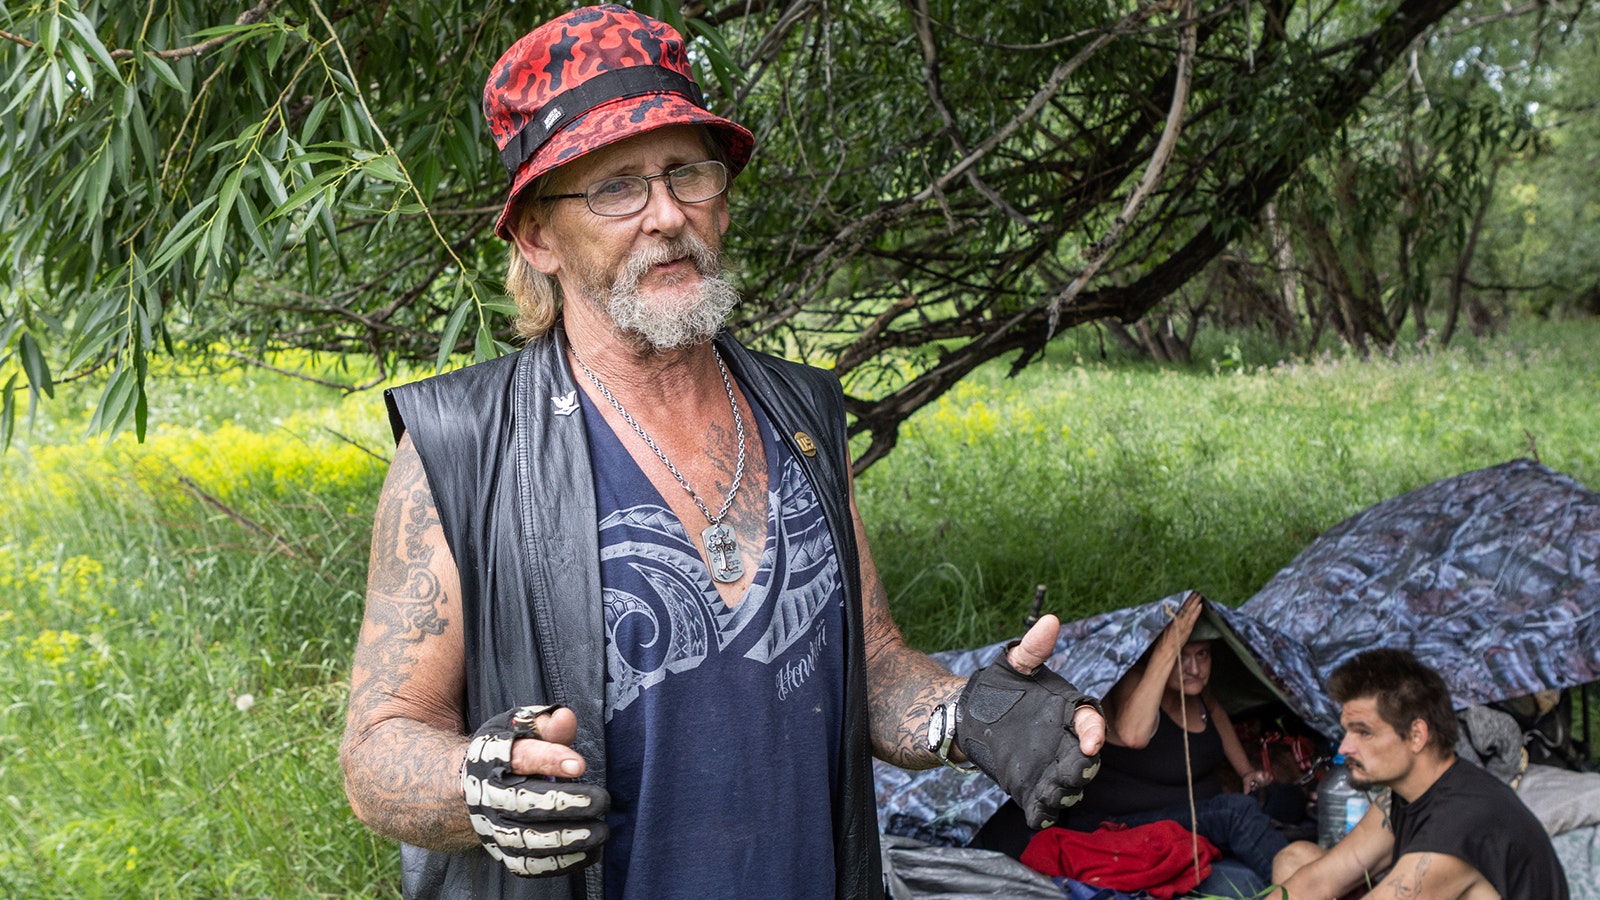 Robert Holcomb is one of the people living in a homeless camp along Crow Creek near the Trail's End area and Morrie Avenue in Cheyenne, Wyoming.